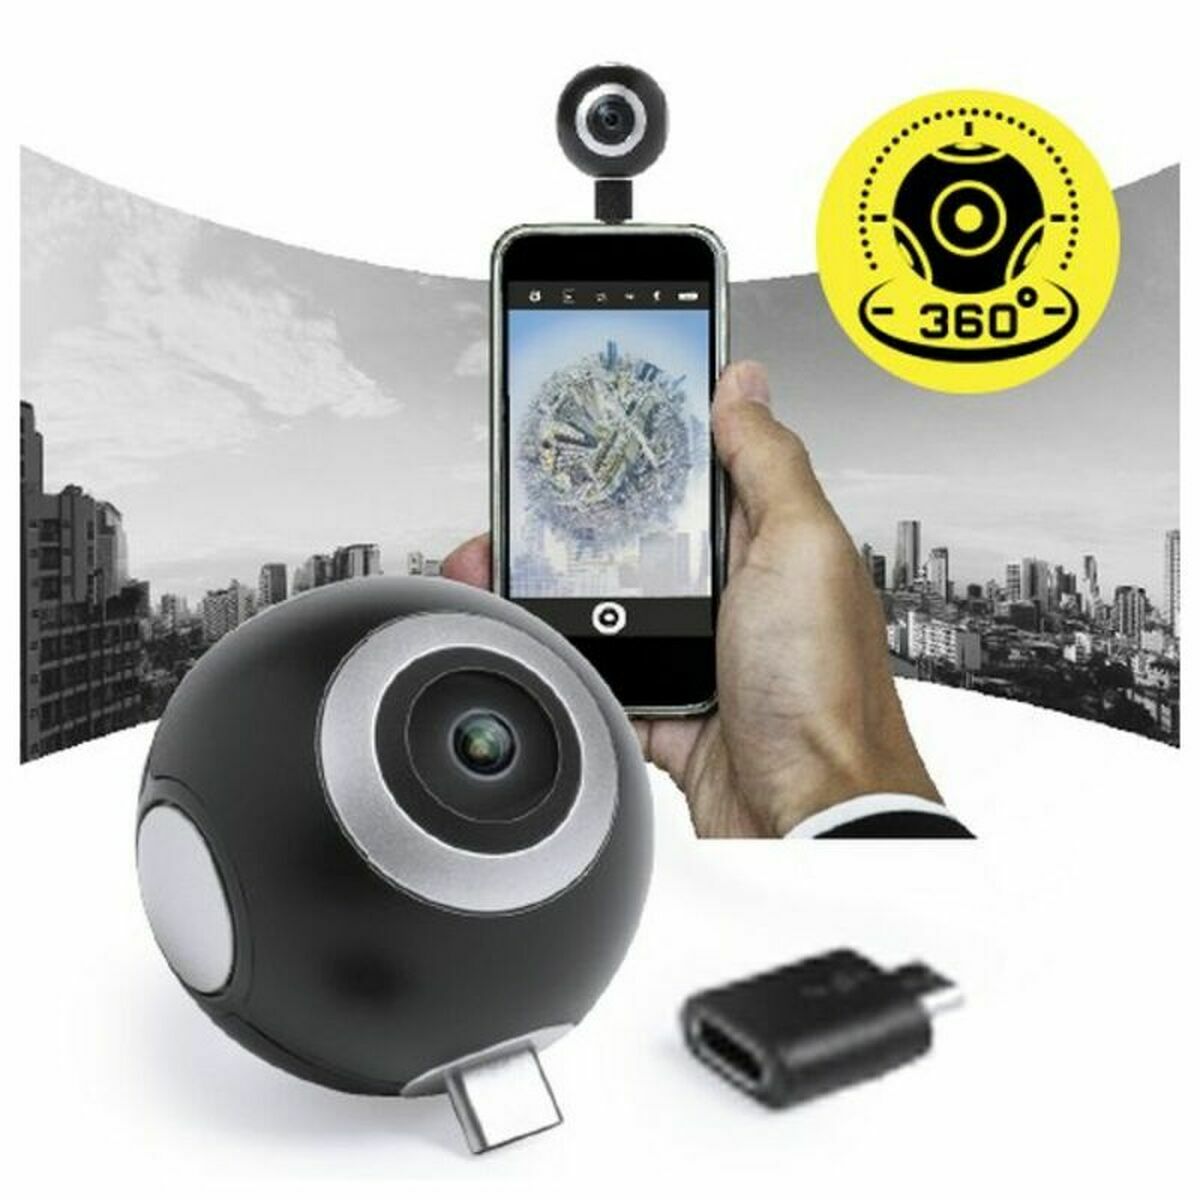 360º Camera for Smartphone Xtra Battery 145771 (50 Units)